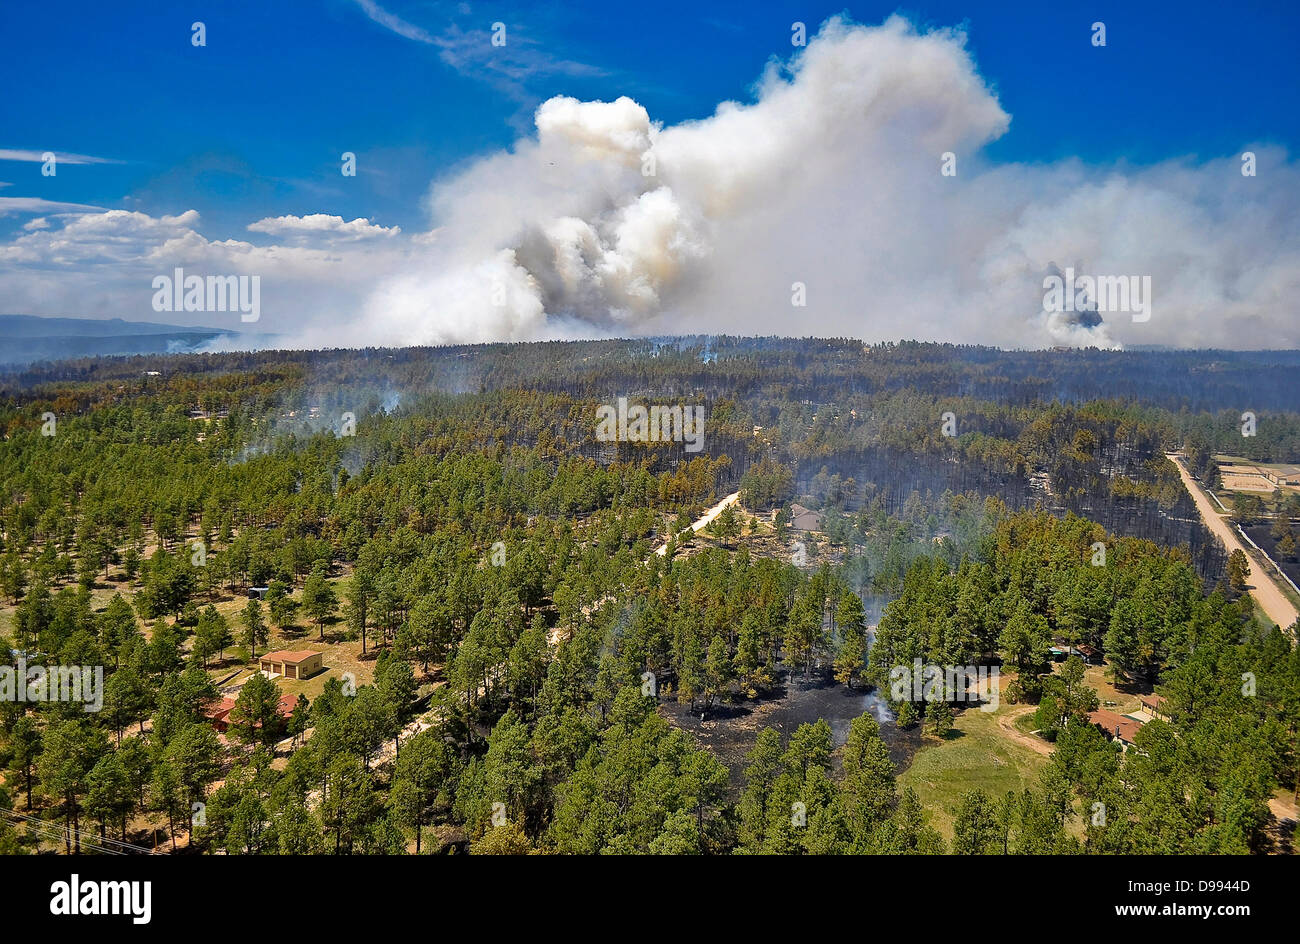 Smoke bellows as the Black Forest Fire continues to burn June 12, 2013 near Colorado Spring, CO. The fire has killed two people and destroyed more than 500 homes becoming the most destructive wildfire in Colorado. Stock Photo